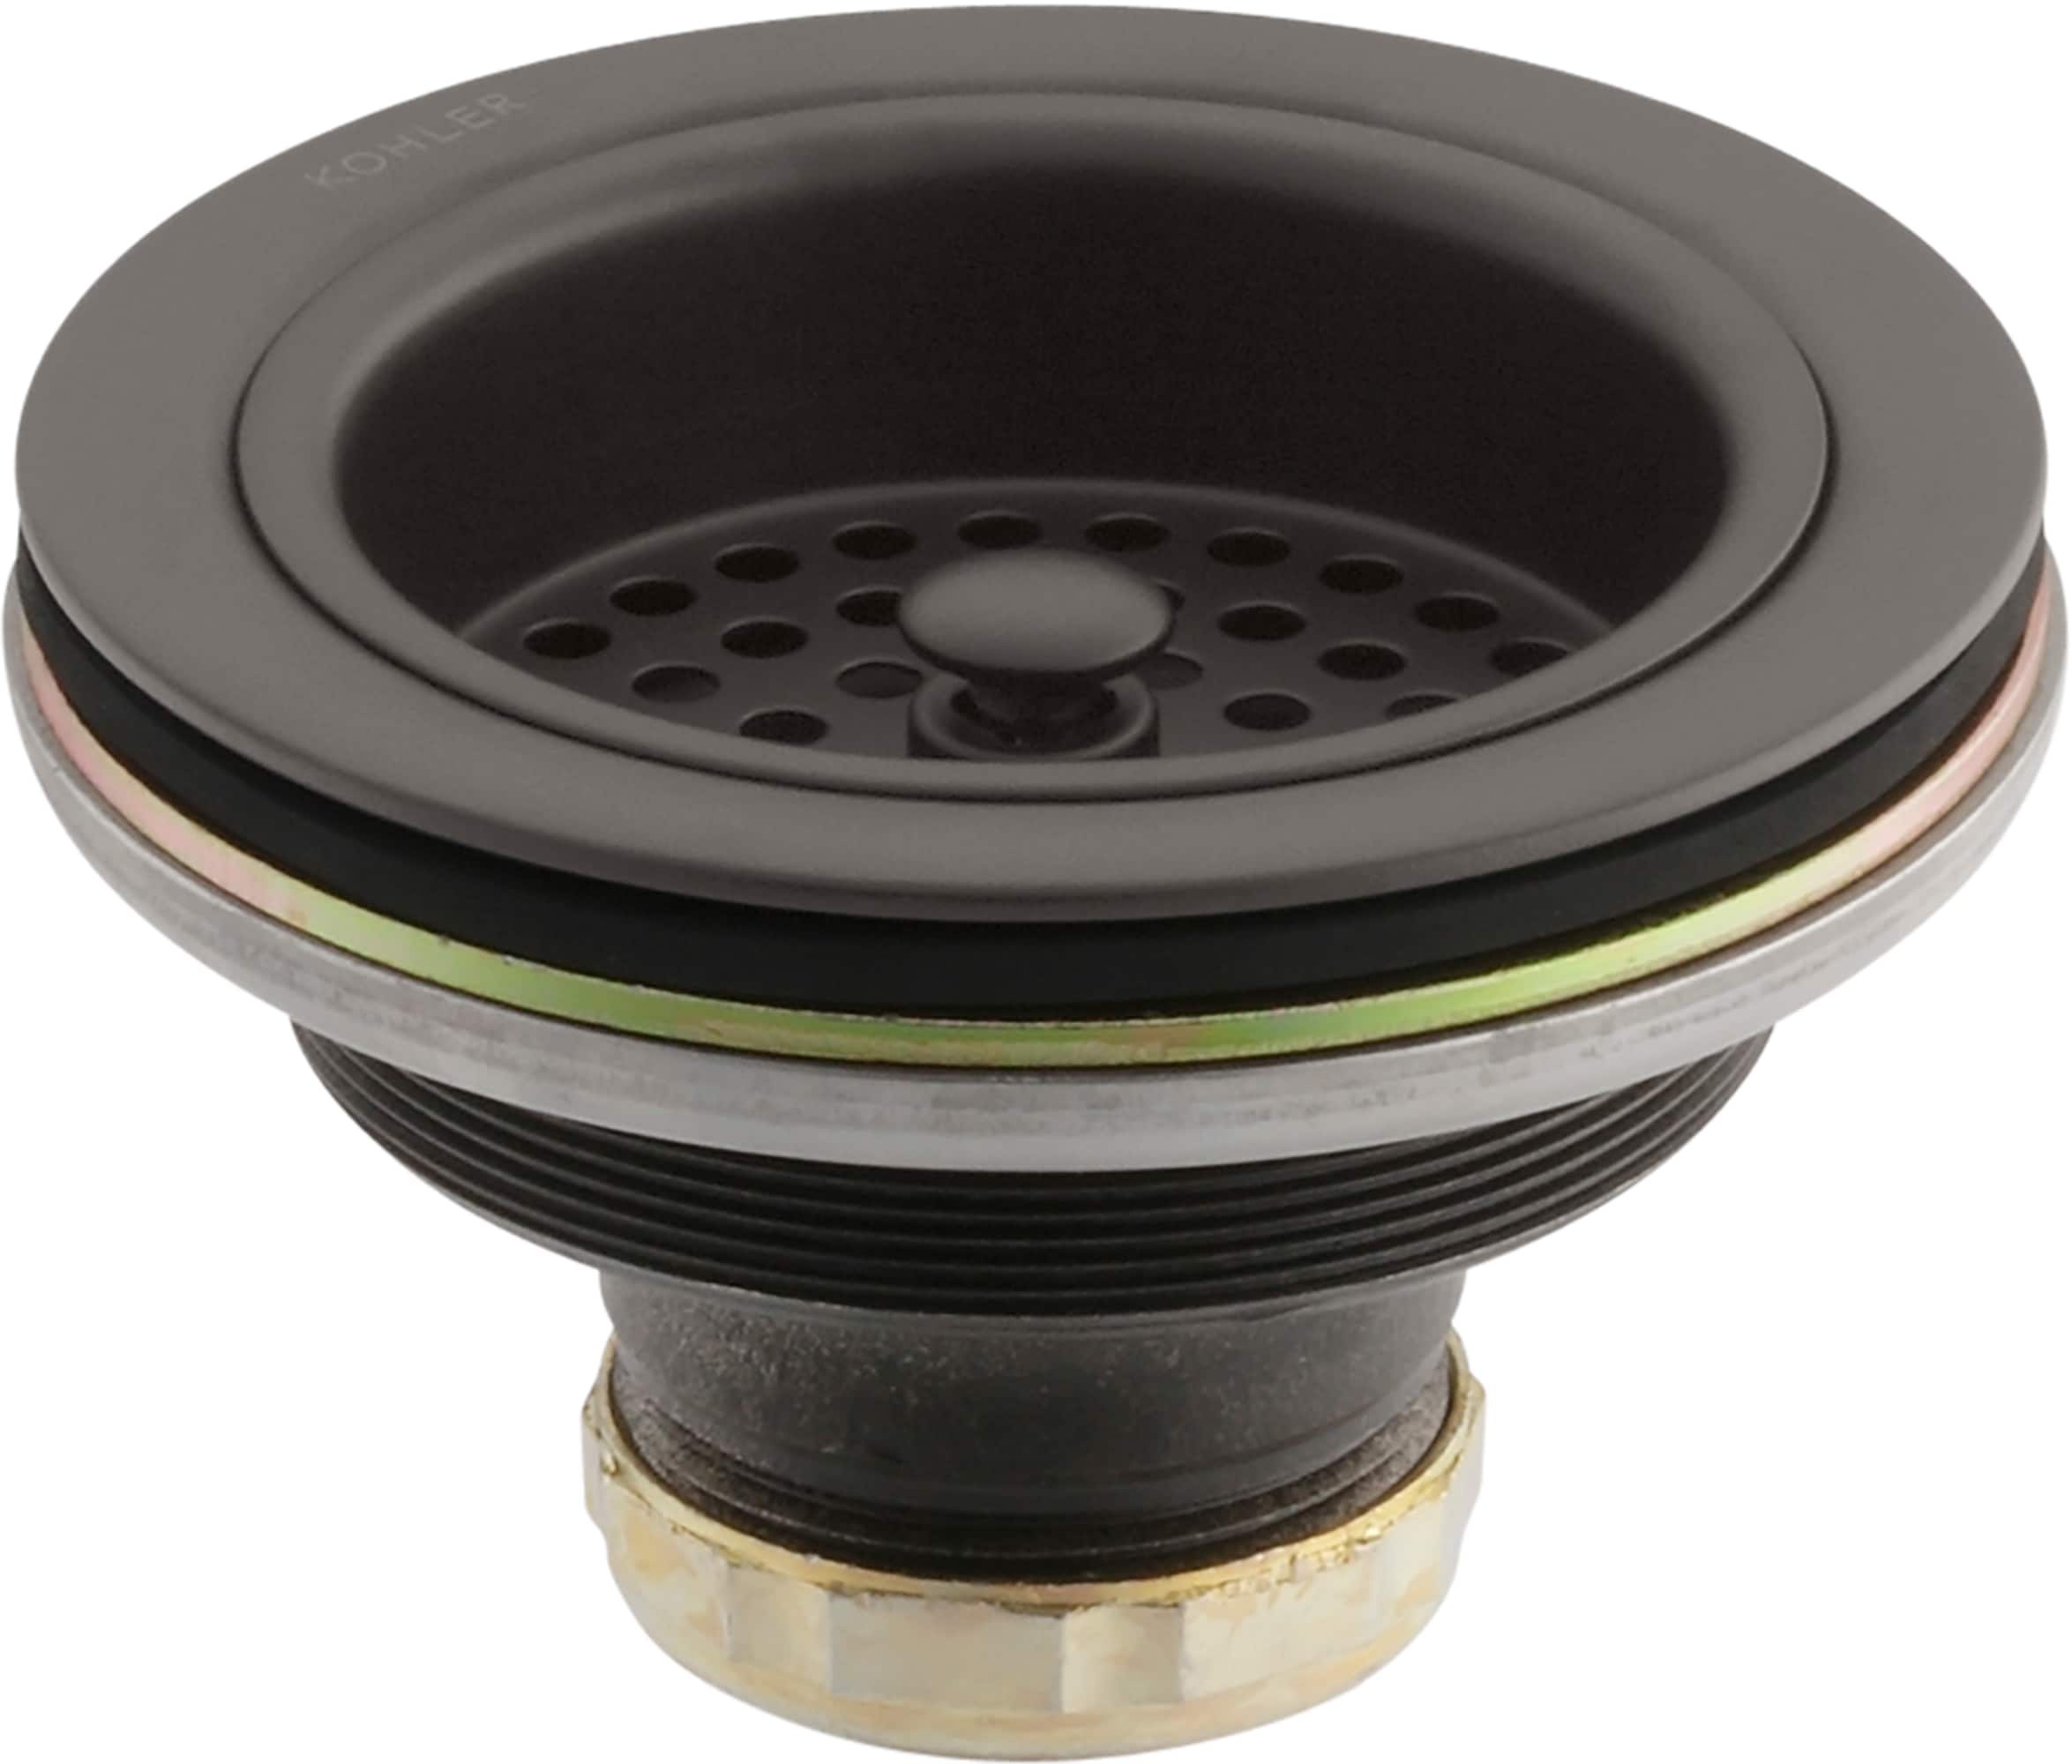 Unlacquered Brass Disposer Flange with Removable Basket Strainer, Hand